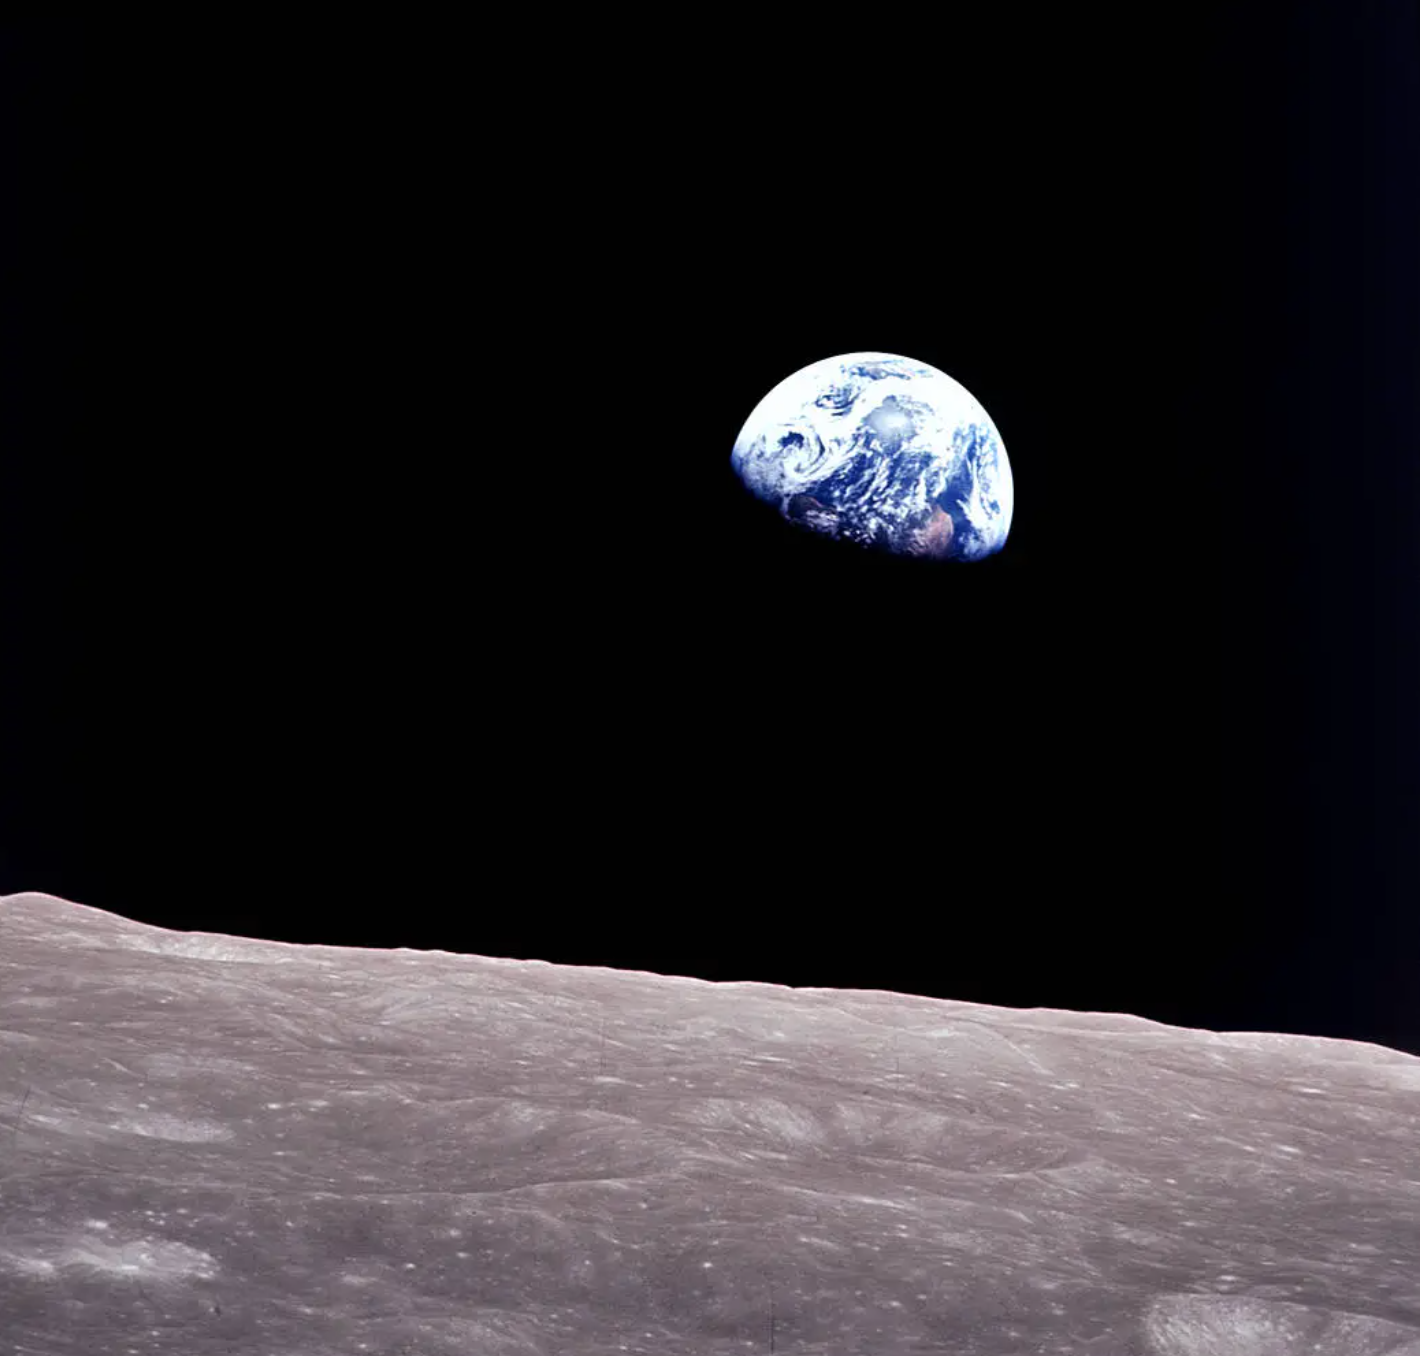 Earthrise is a photograph of Earth and part of the Moon's surface that was taken from lunar orbit by astronaut William Anders on December 24, 1968, during the Apollo 8 mission.